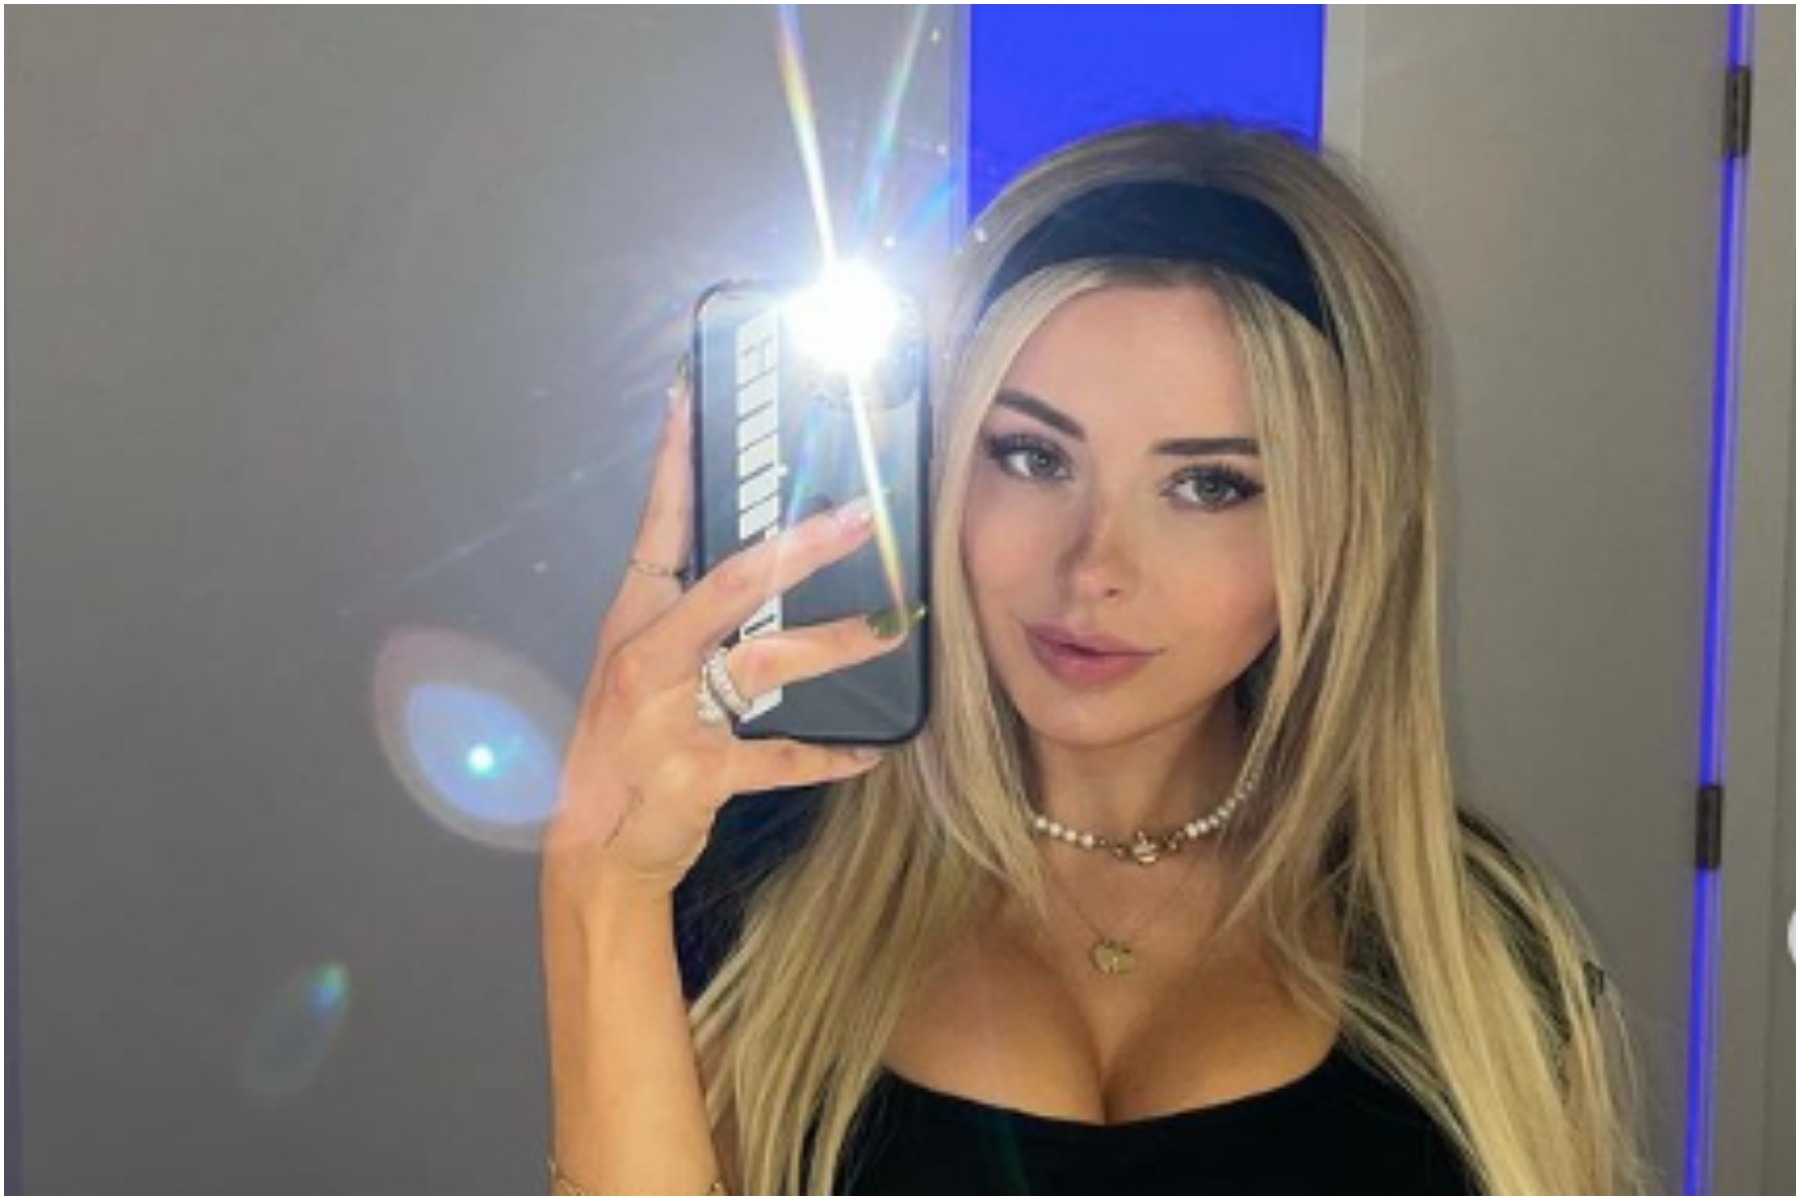 Corinna Kopf's OnlyFans sparks anger because pictures are from Instagr...